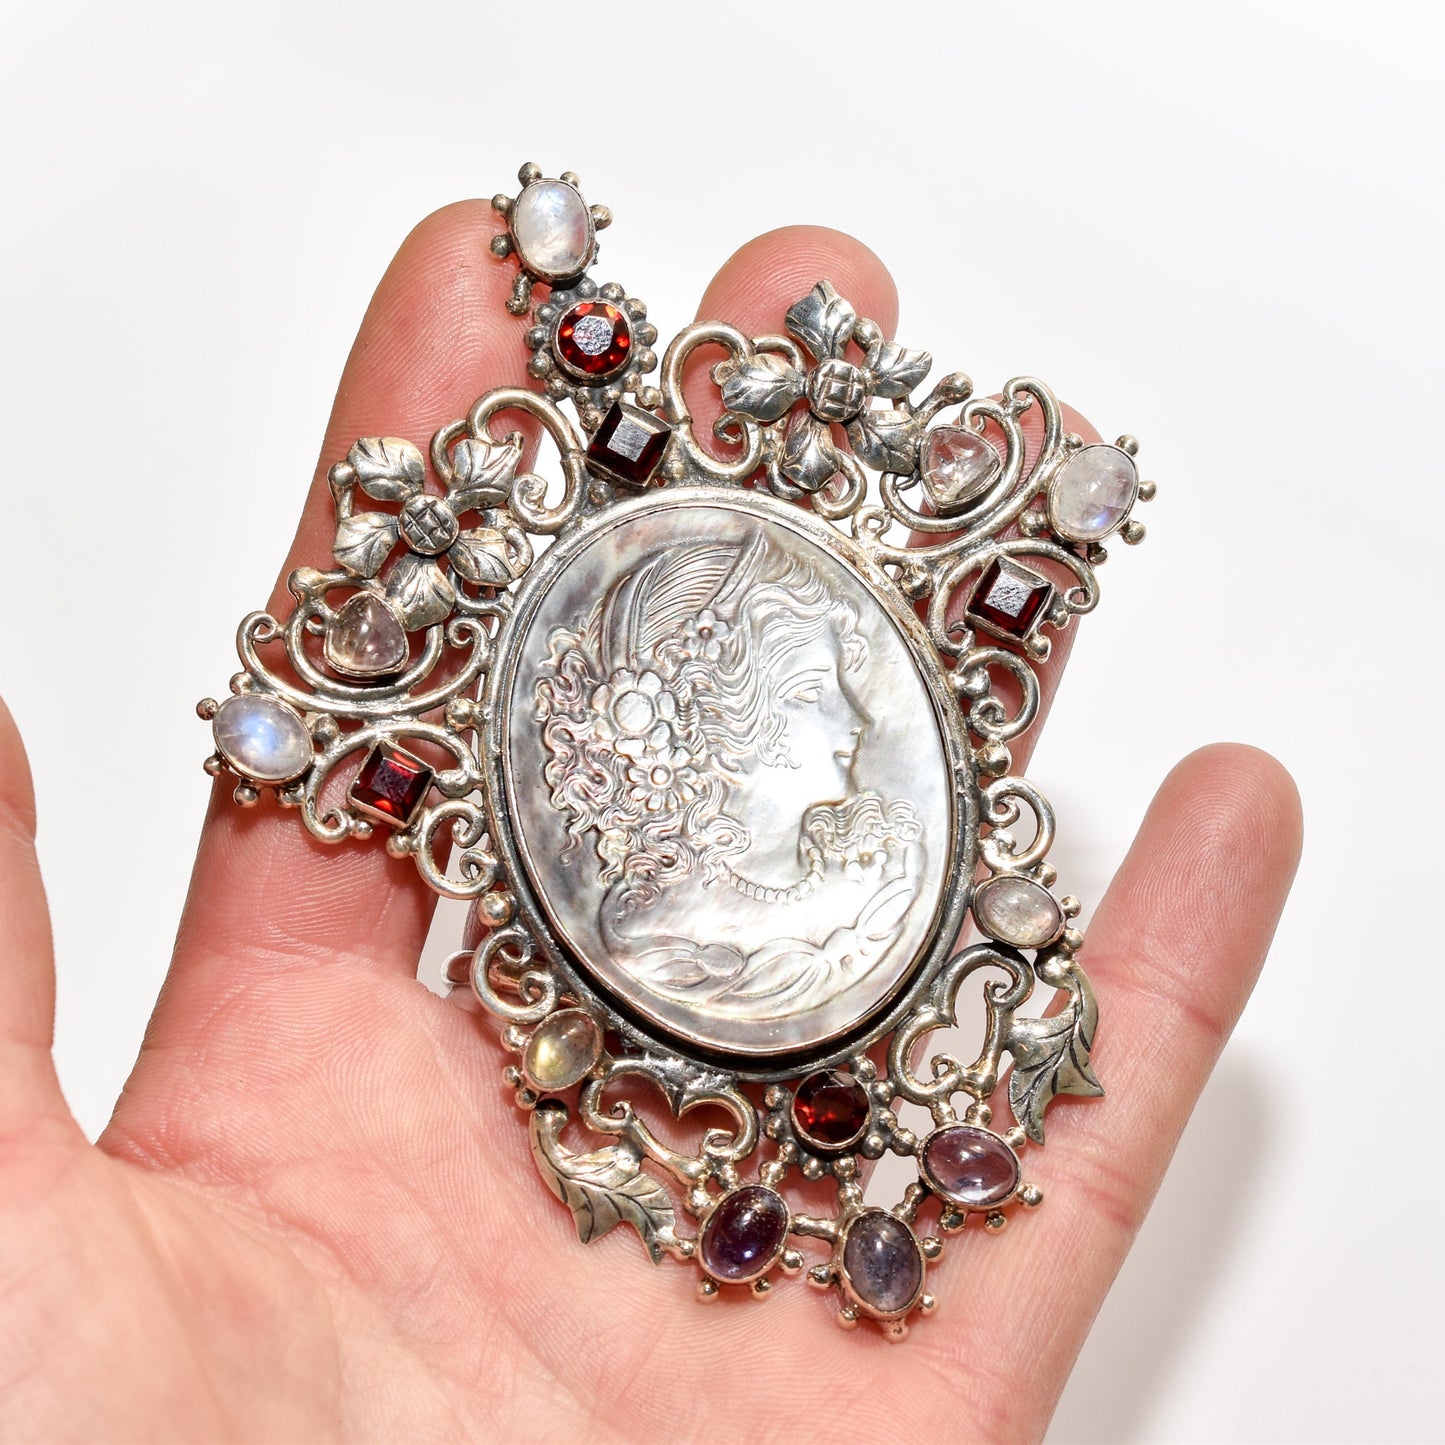 Victorian-style sterling silver cameo pendant brooch with multiple stones and ornate design, held in a hand, showing the size at 4 inches long.